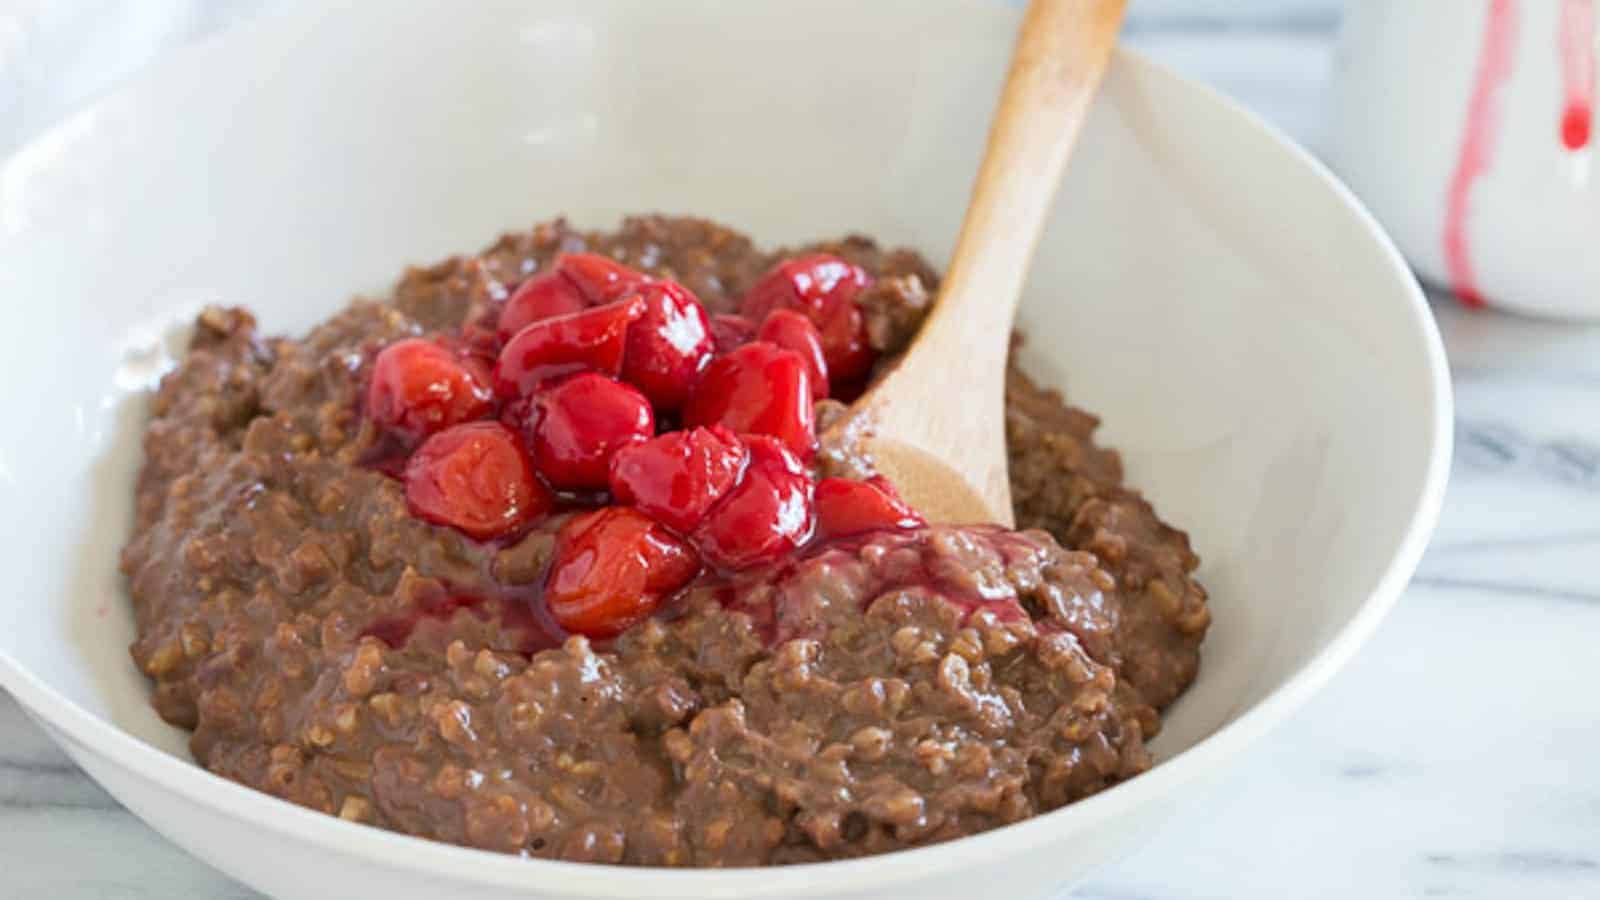 <p>Chocolate cherry steel cut oatmeal, slow-cooked to perfection, is a luxurious way to start a weekend morning. Its rich and comforting flavor makes it an excellent choice for a leisurely breakfast that outshines typical brunch offerings.<br><strong>Get the Recipe: </strong><a href="https://www.runningtothekitchen.com/slow-cooker-chocolate-cherry-steel-cut-oatmeal/?utm_source=msn&utm_medium=page&utm_campaign=msn">Chocolate Cherry Steel Cut Oatmeal</a></p>